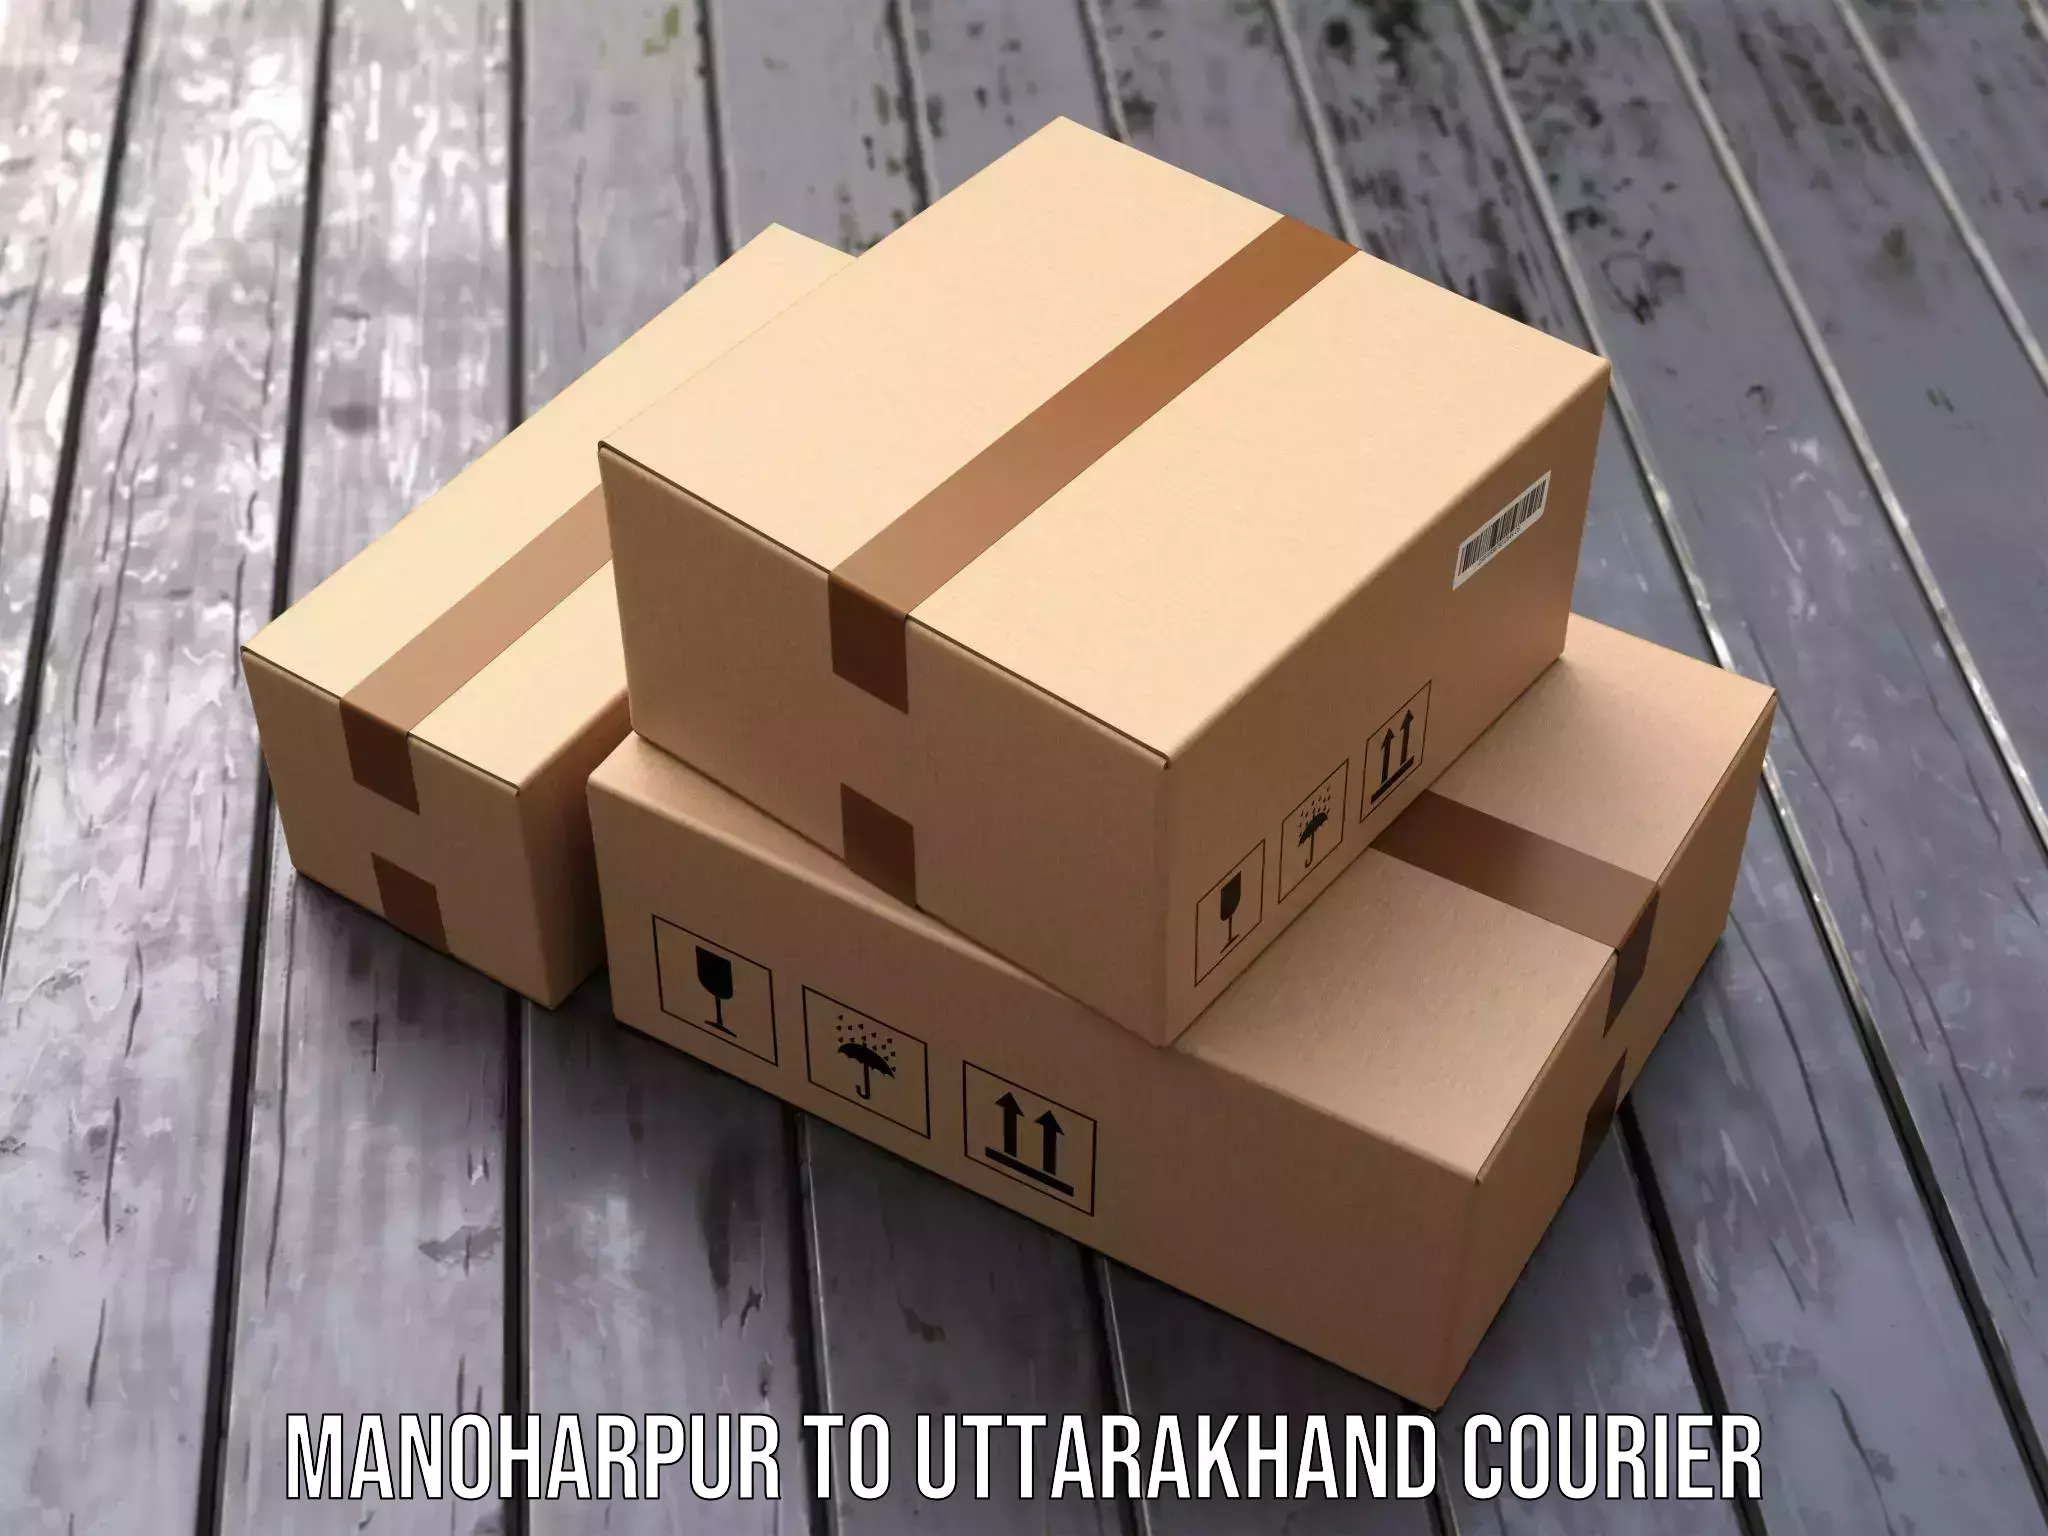 Tech-enabled shipping Manoharpur to IIT Roorkee